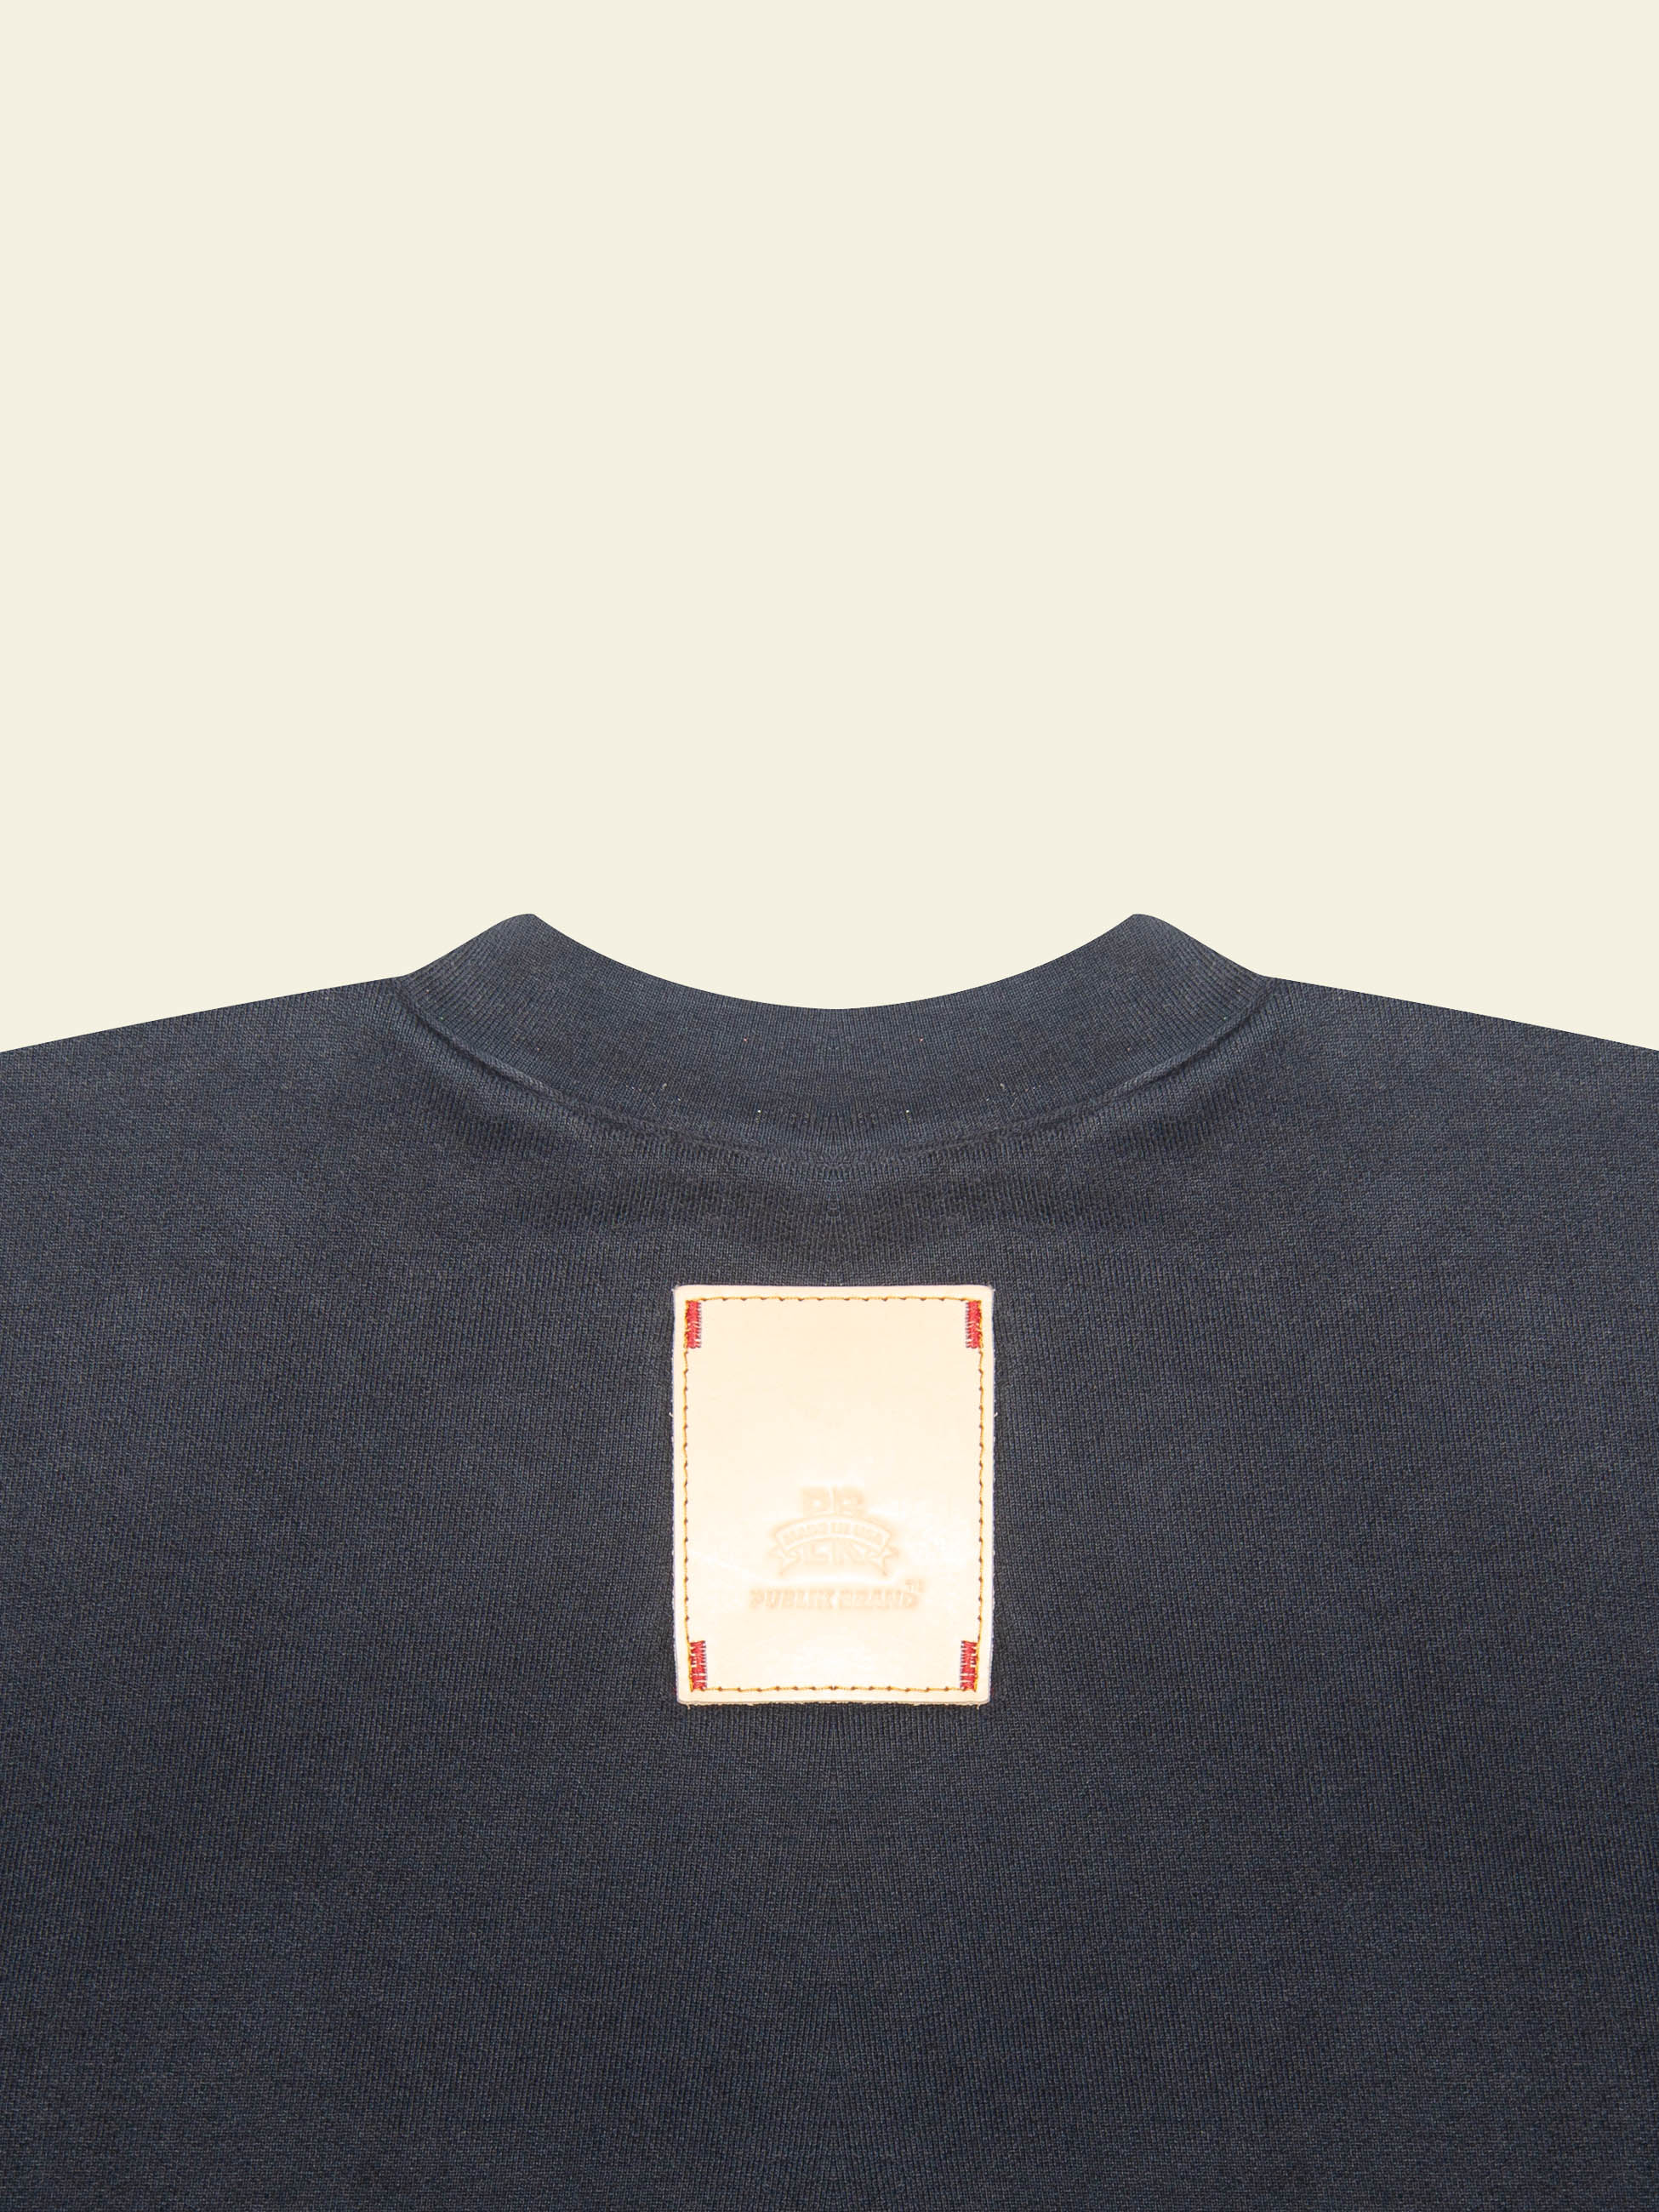 Publik Brand Double Layered Sweatshirt Crewneck College Navy Heavyweight Fleece, all made in USA, details of back side